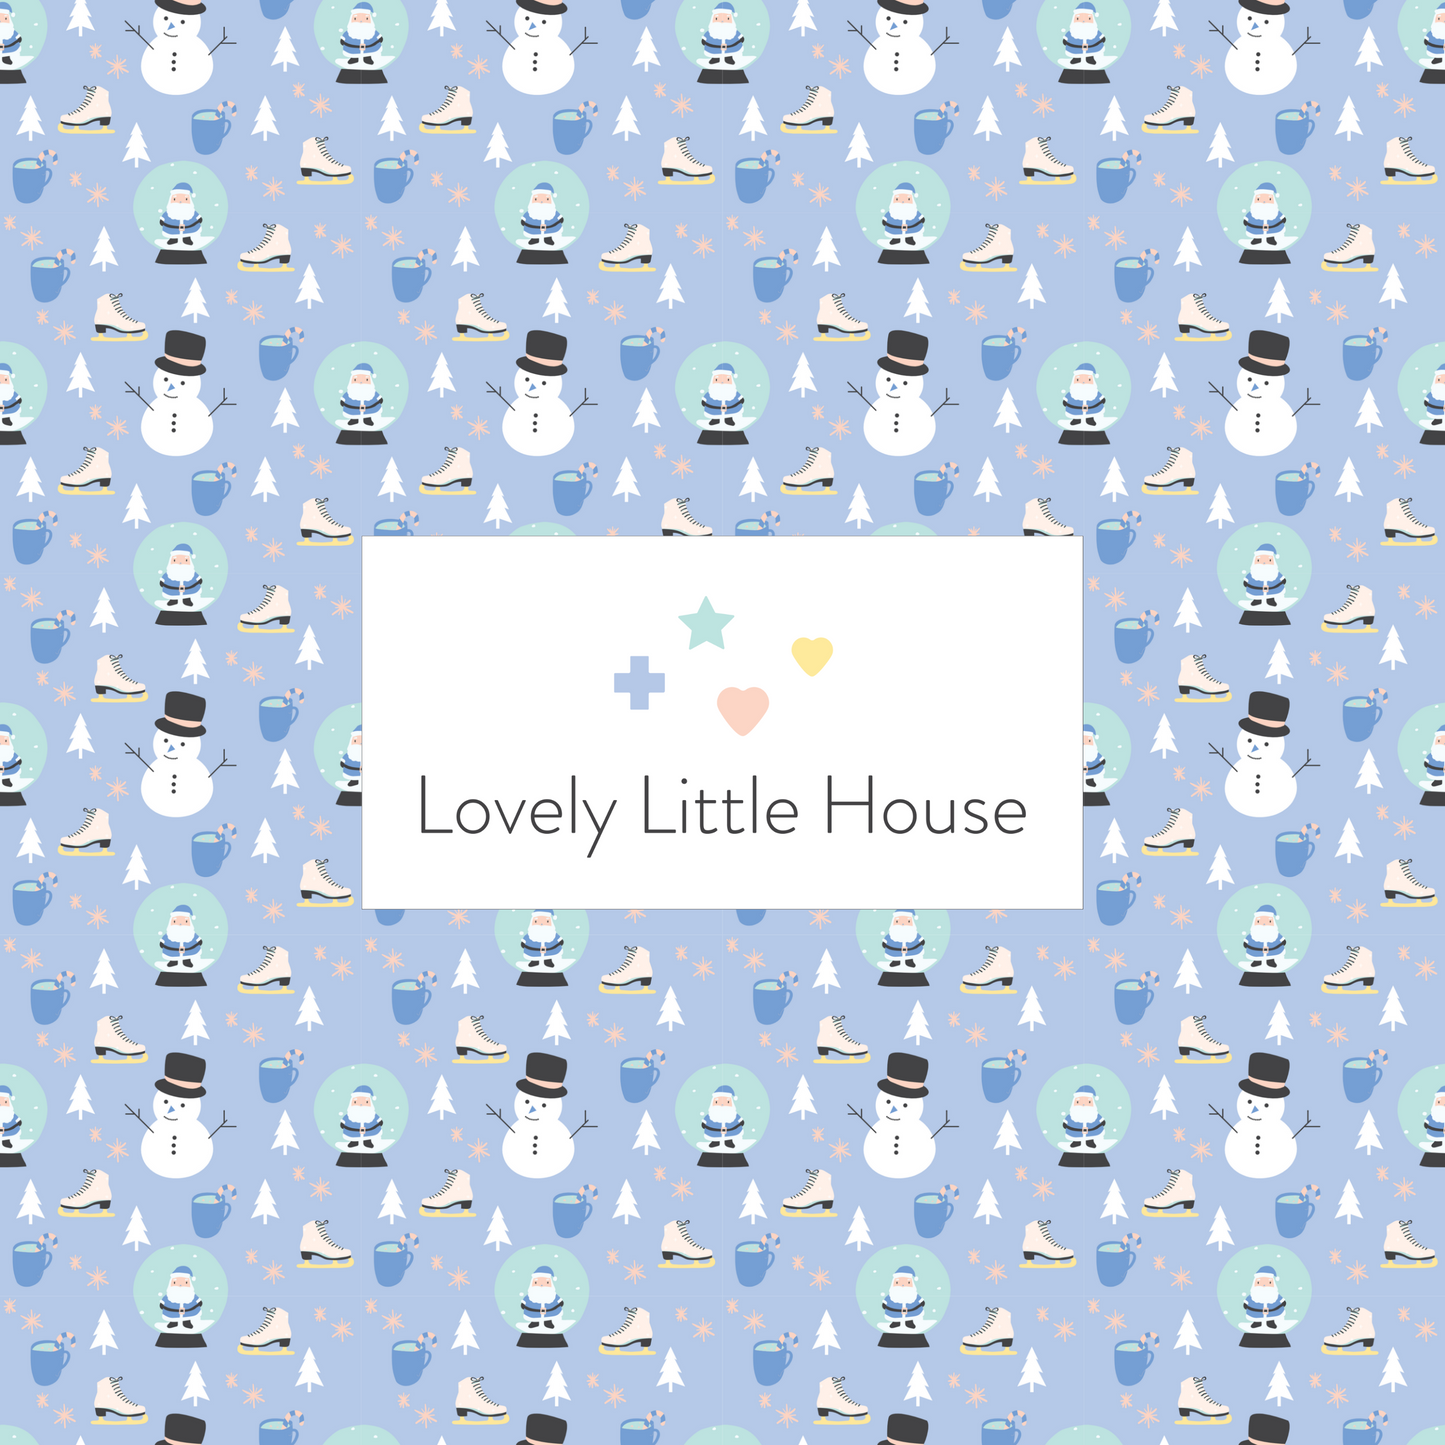 A dollhouse wallpaper pattern of Snowman, Santa snow globe, ice skates, and Christmas hot chocolate in blue